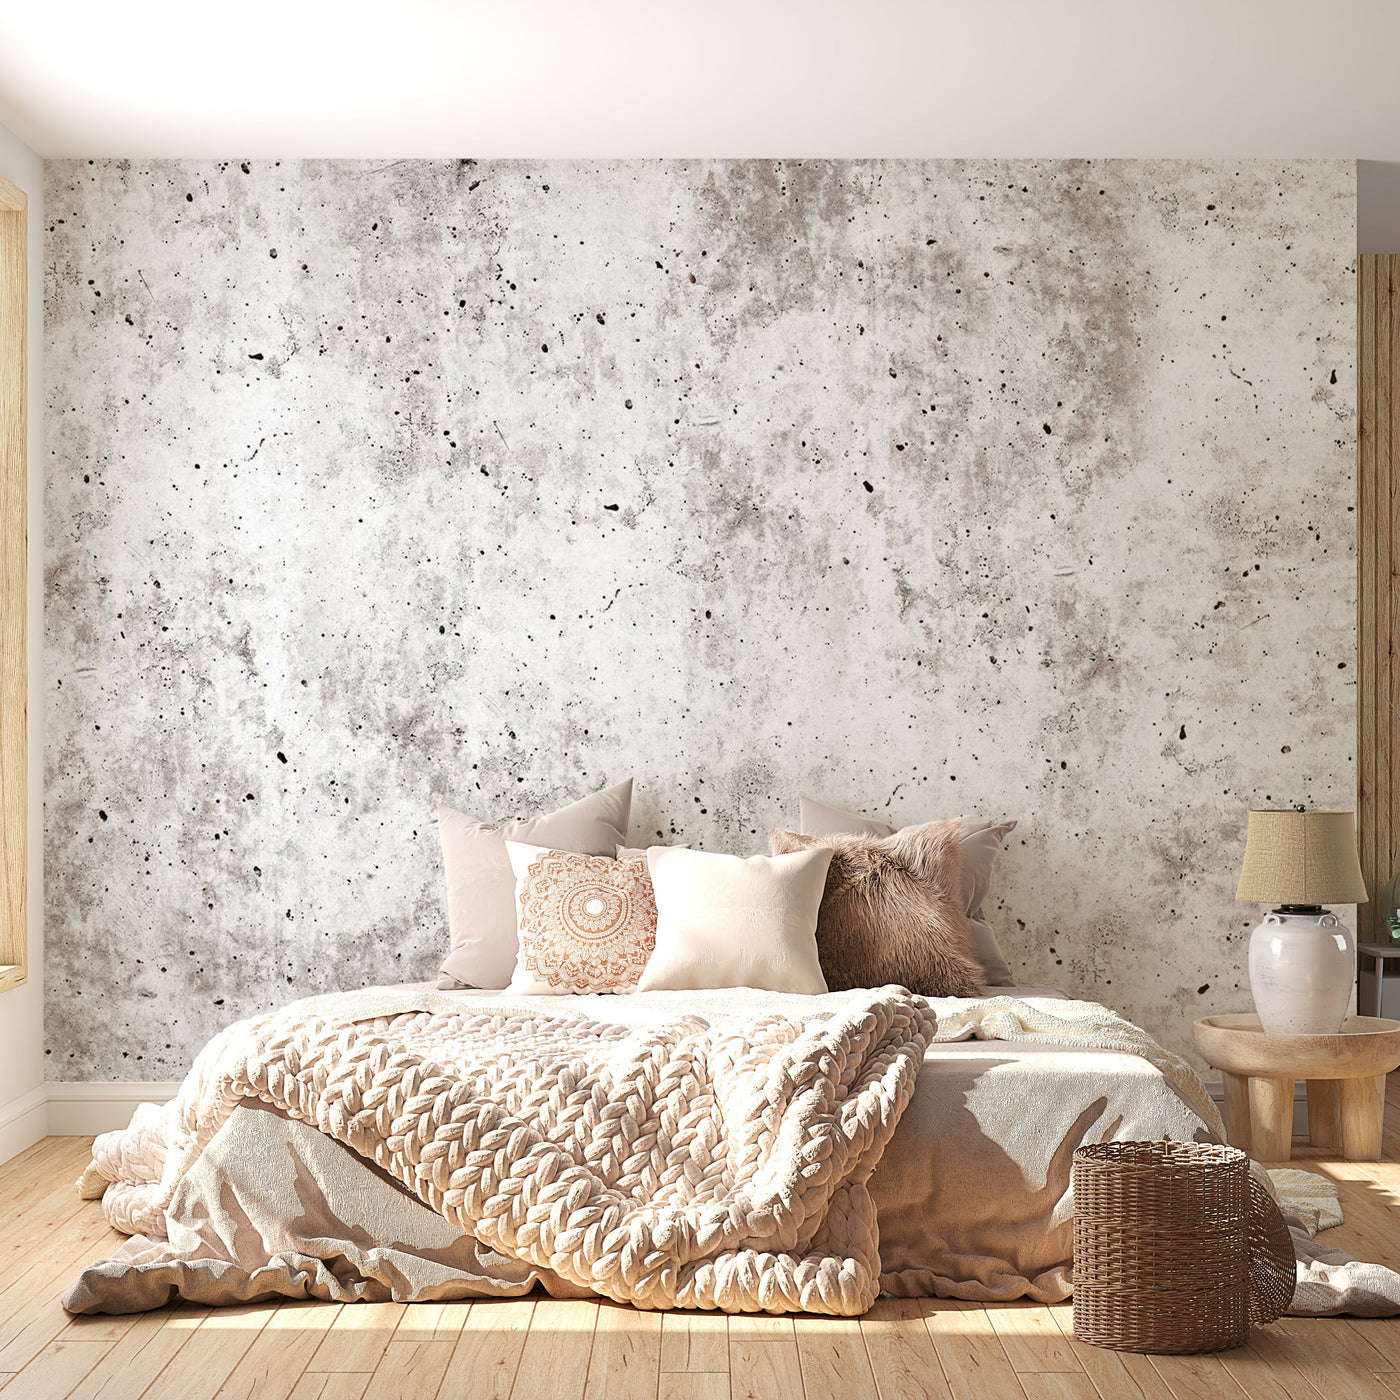 Peel & Stick Wall Mural - Modern Concrete Wall - Removable Wall Decals